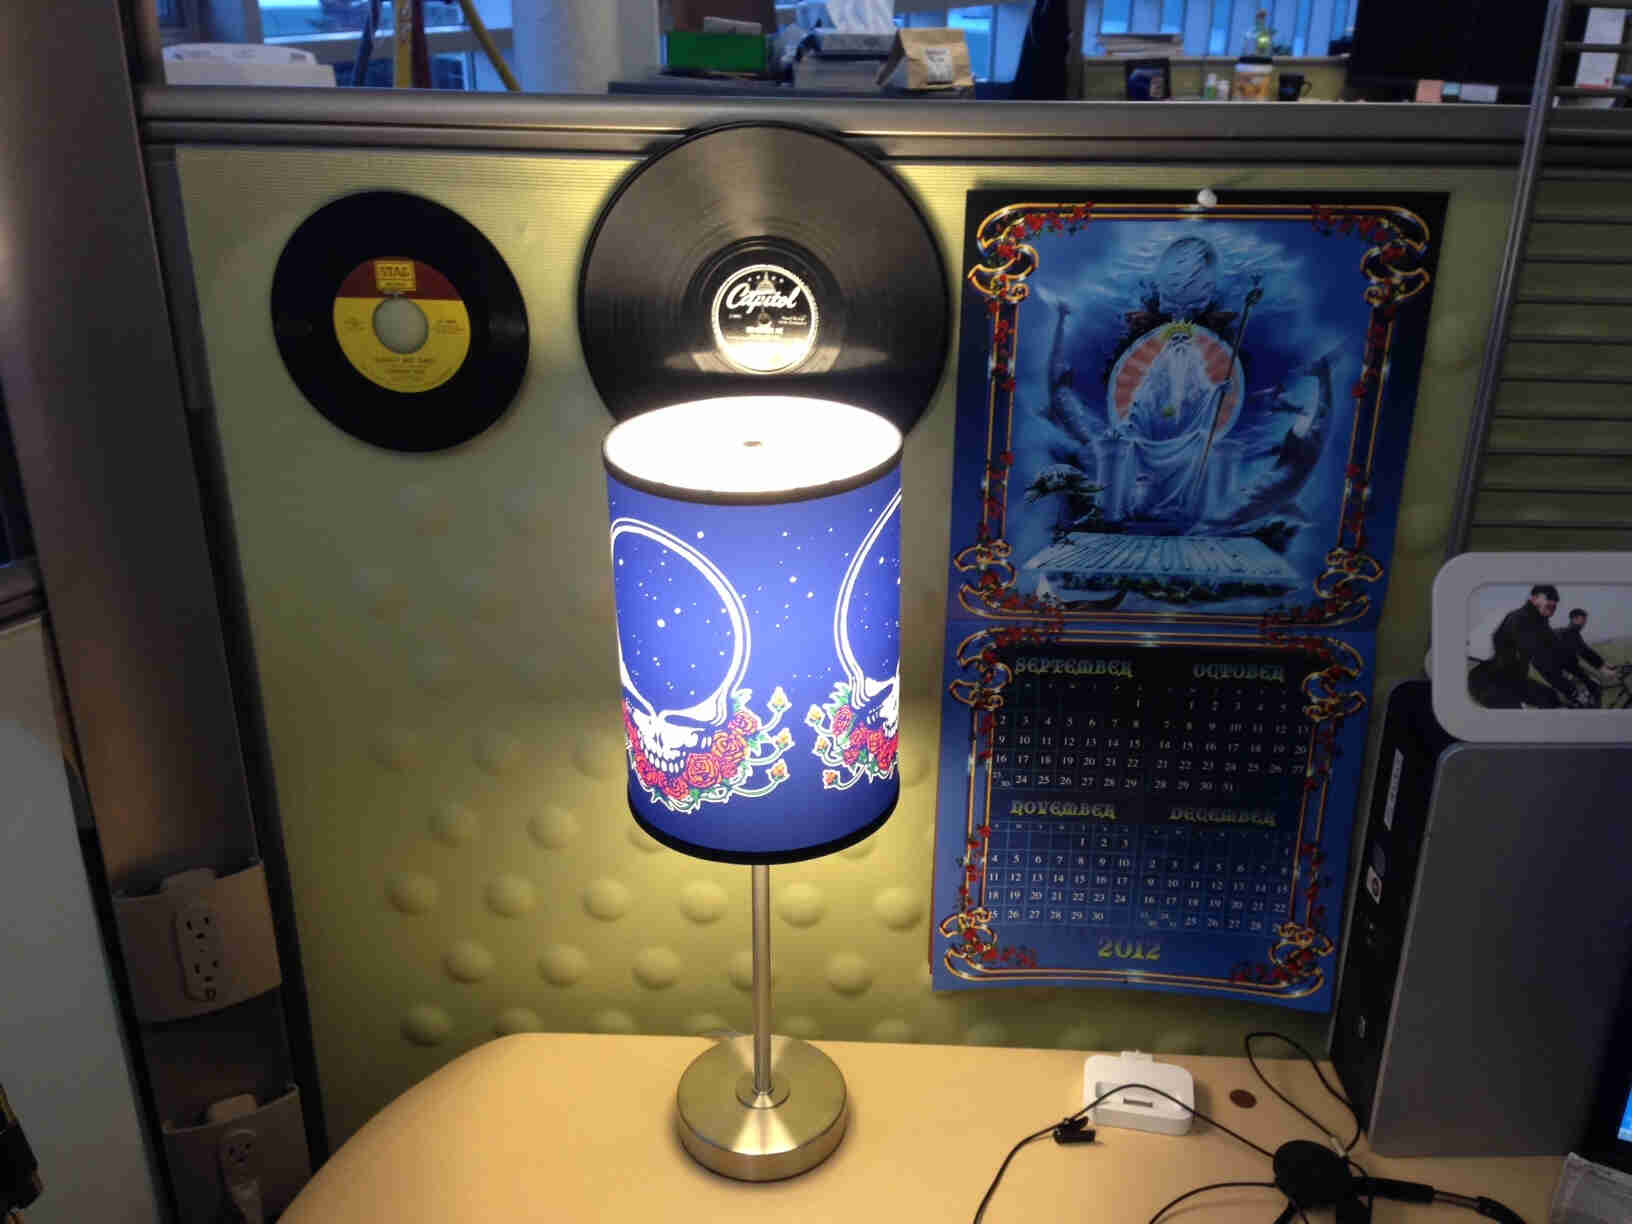 A lamp with a Grateful Dead shade, on a table in a cubicle, with records on a wall behind it